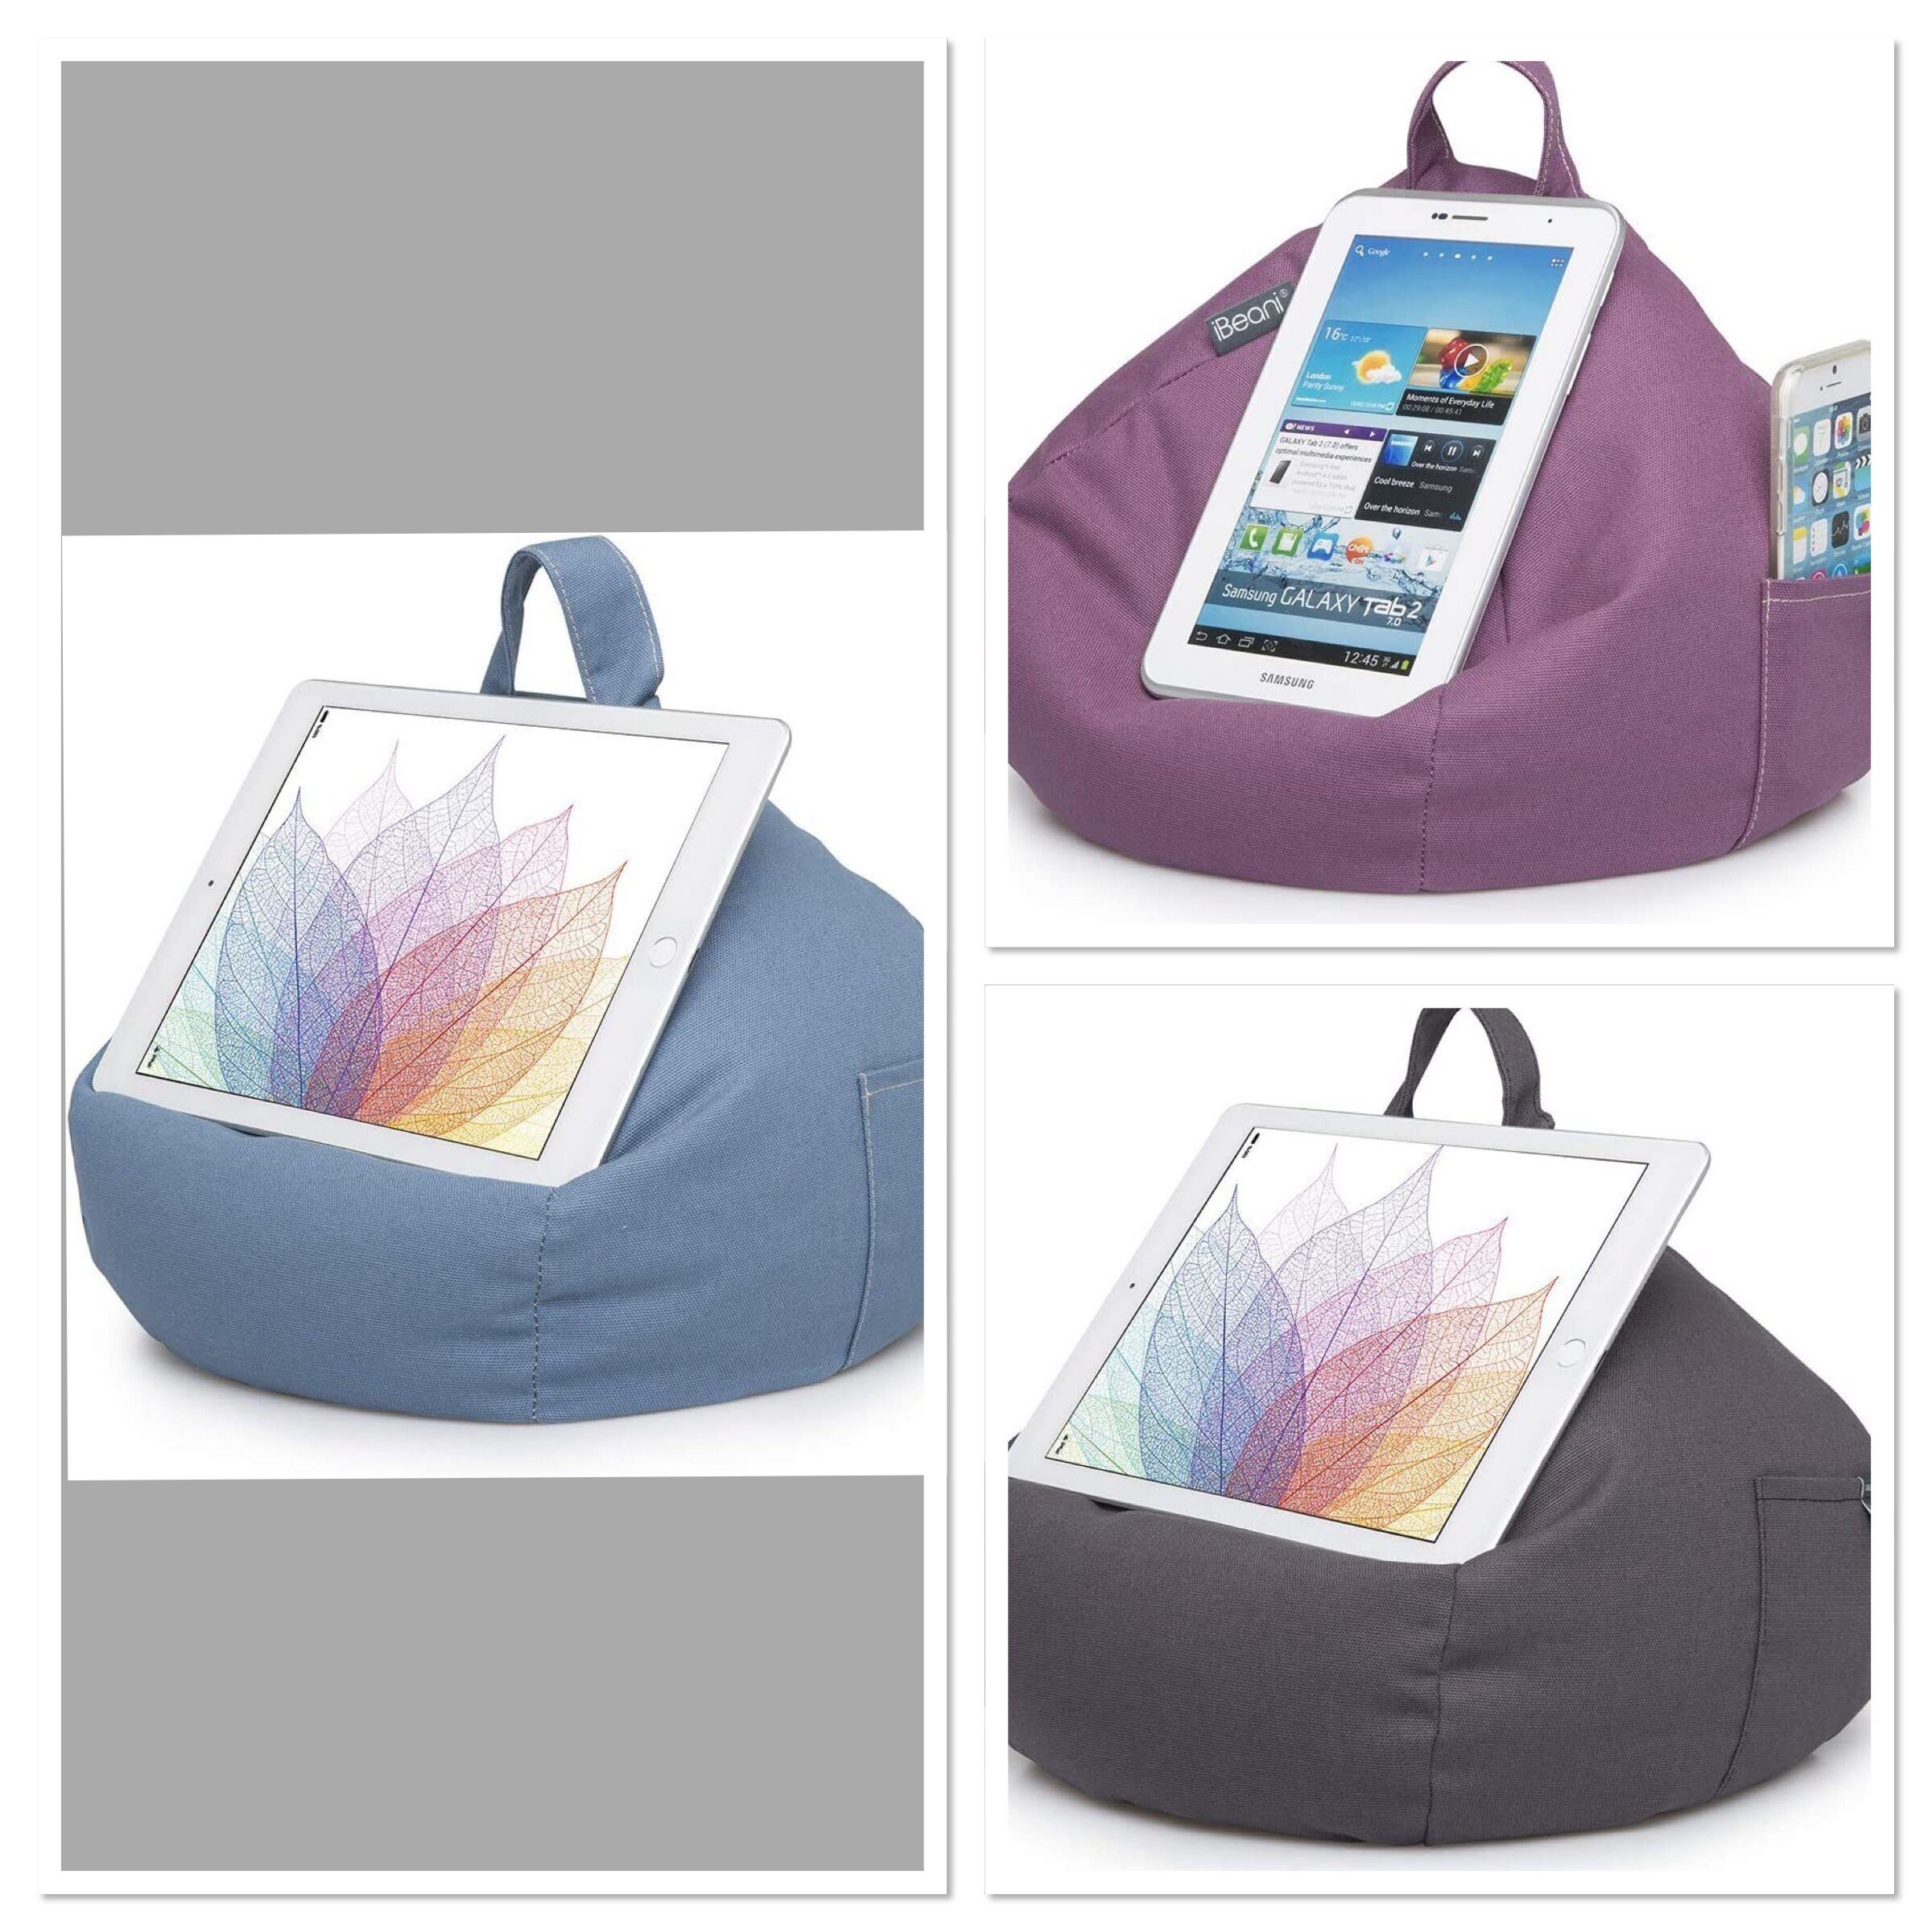 iPad, Tablet & eReader Bean Bag Cushion by iBeani - Dog & Bone - Gifts For  Him | Gifts For Her